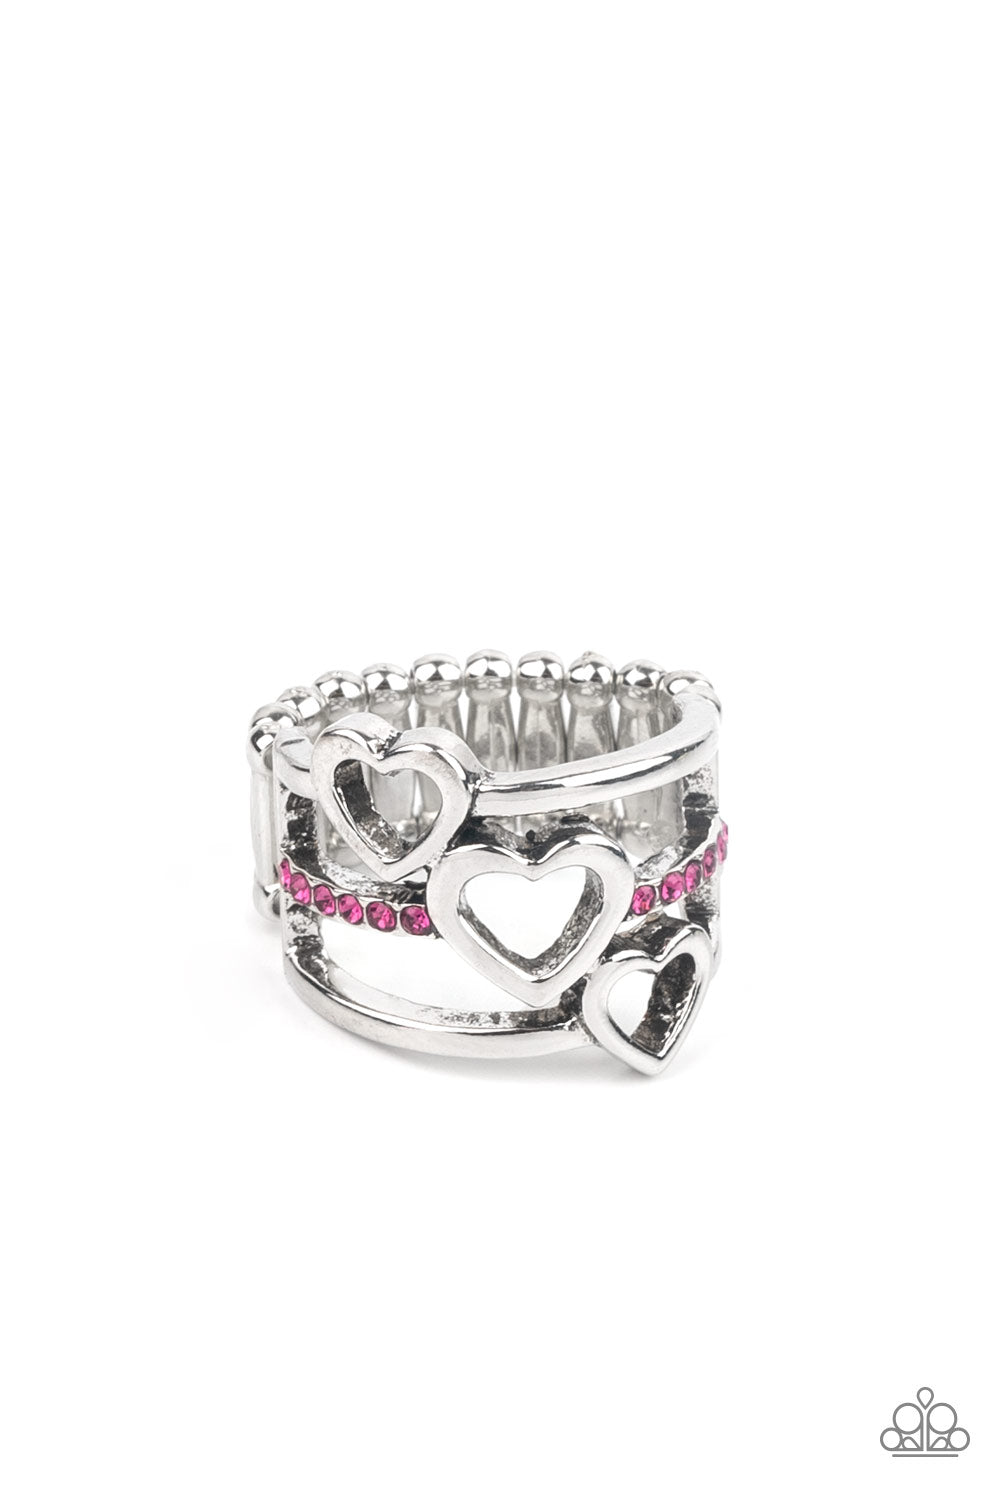 Give Me AMOR - pink - Paparazzi ring